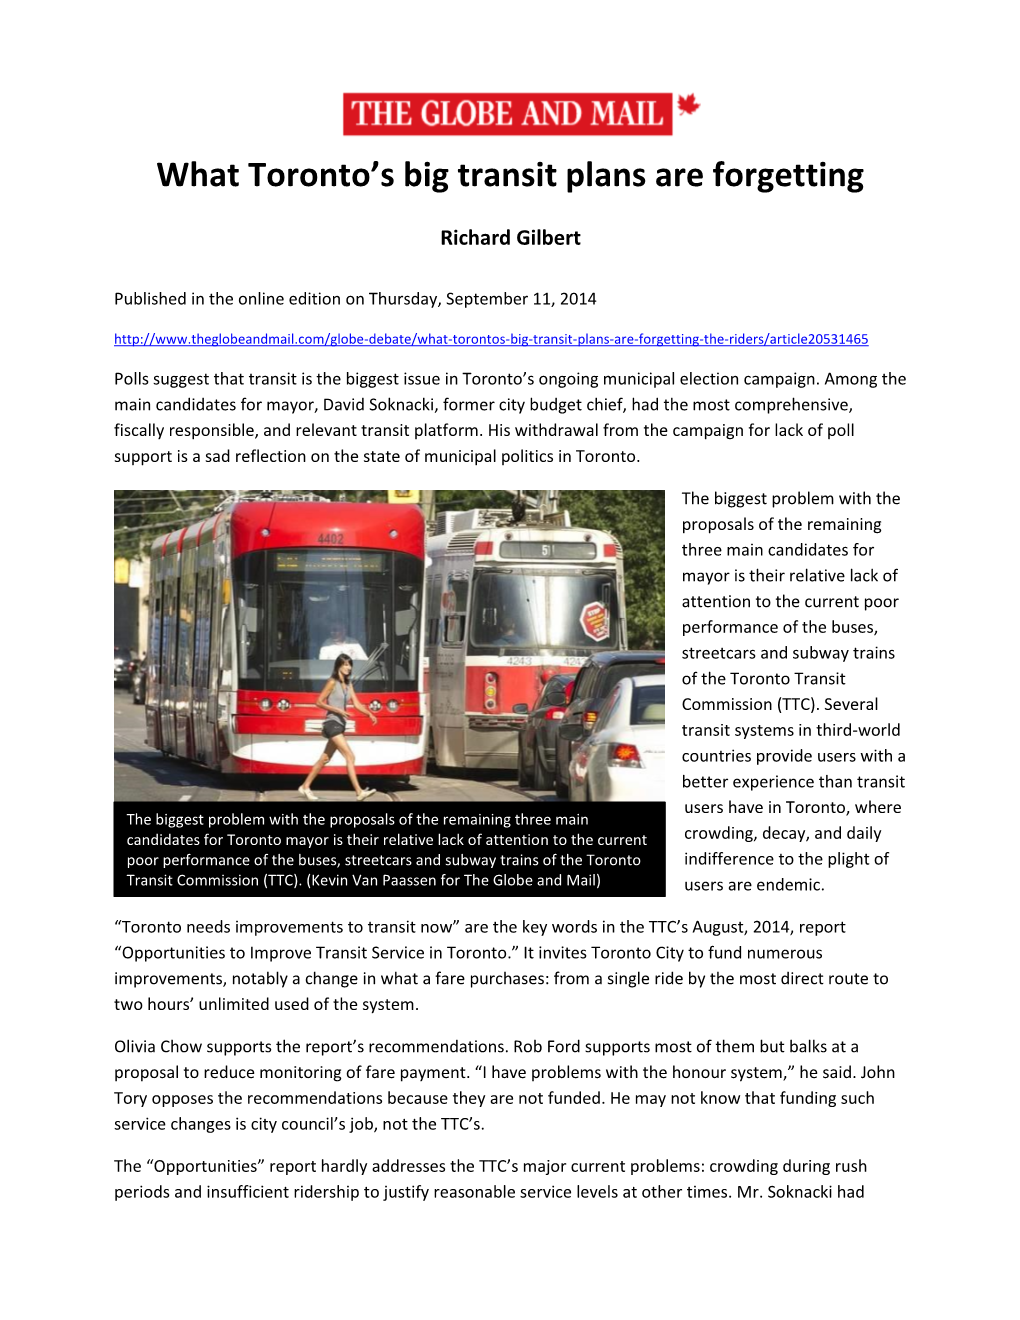 What Toronto's Big Transit Plans Are Forgetting